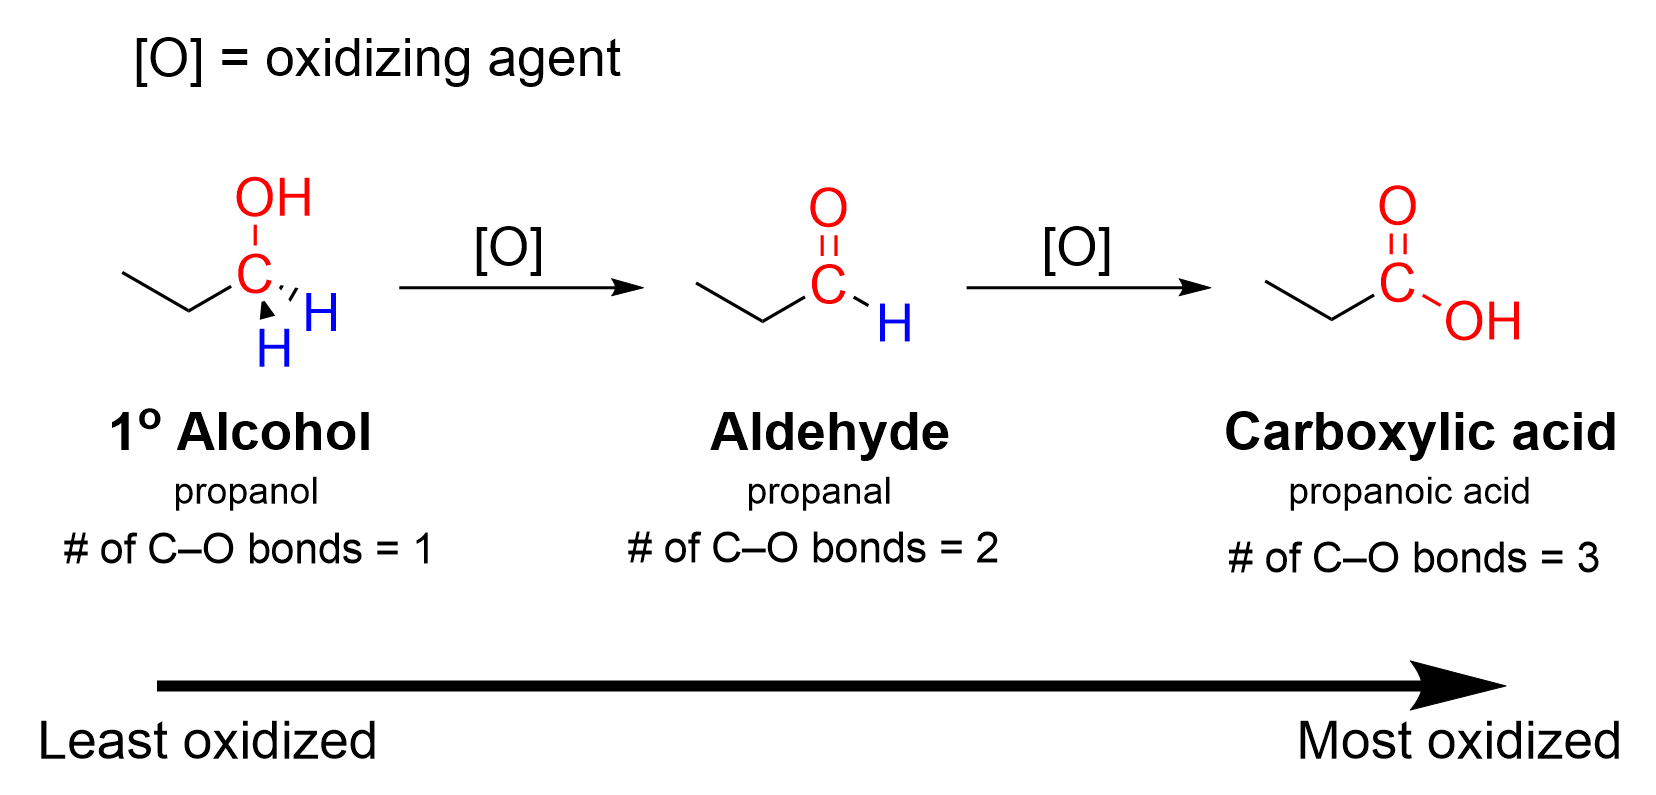 Propanol, a primary alcohol, contains a carbon bonded to an ethyl group, an OH group and 2 other Hs, so it contains 1 C-O bond. A horizontal arrow to the right with [O] on top (oxidizing agent) forms an aldehyde (propanal) containing 2 C-O bonds. The alcohol carbon is double bonded to the oxygen and singly bonded to ethyl and H. One more oxidation leads to the conversion of aldehyde into a carboxylic acid (propanoic acid) with 3 C-O bonds. A large horizontal arrow drawn below the 3 compounds points towards the right where the alcohol on the extreme left is the least oxidized and the carboxylic acid is the most oxidized.